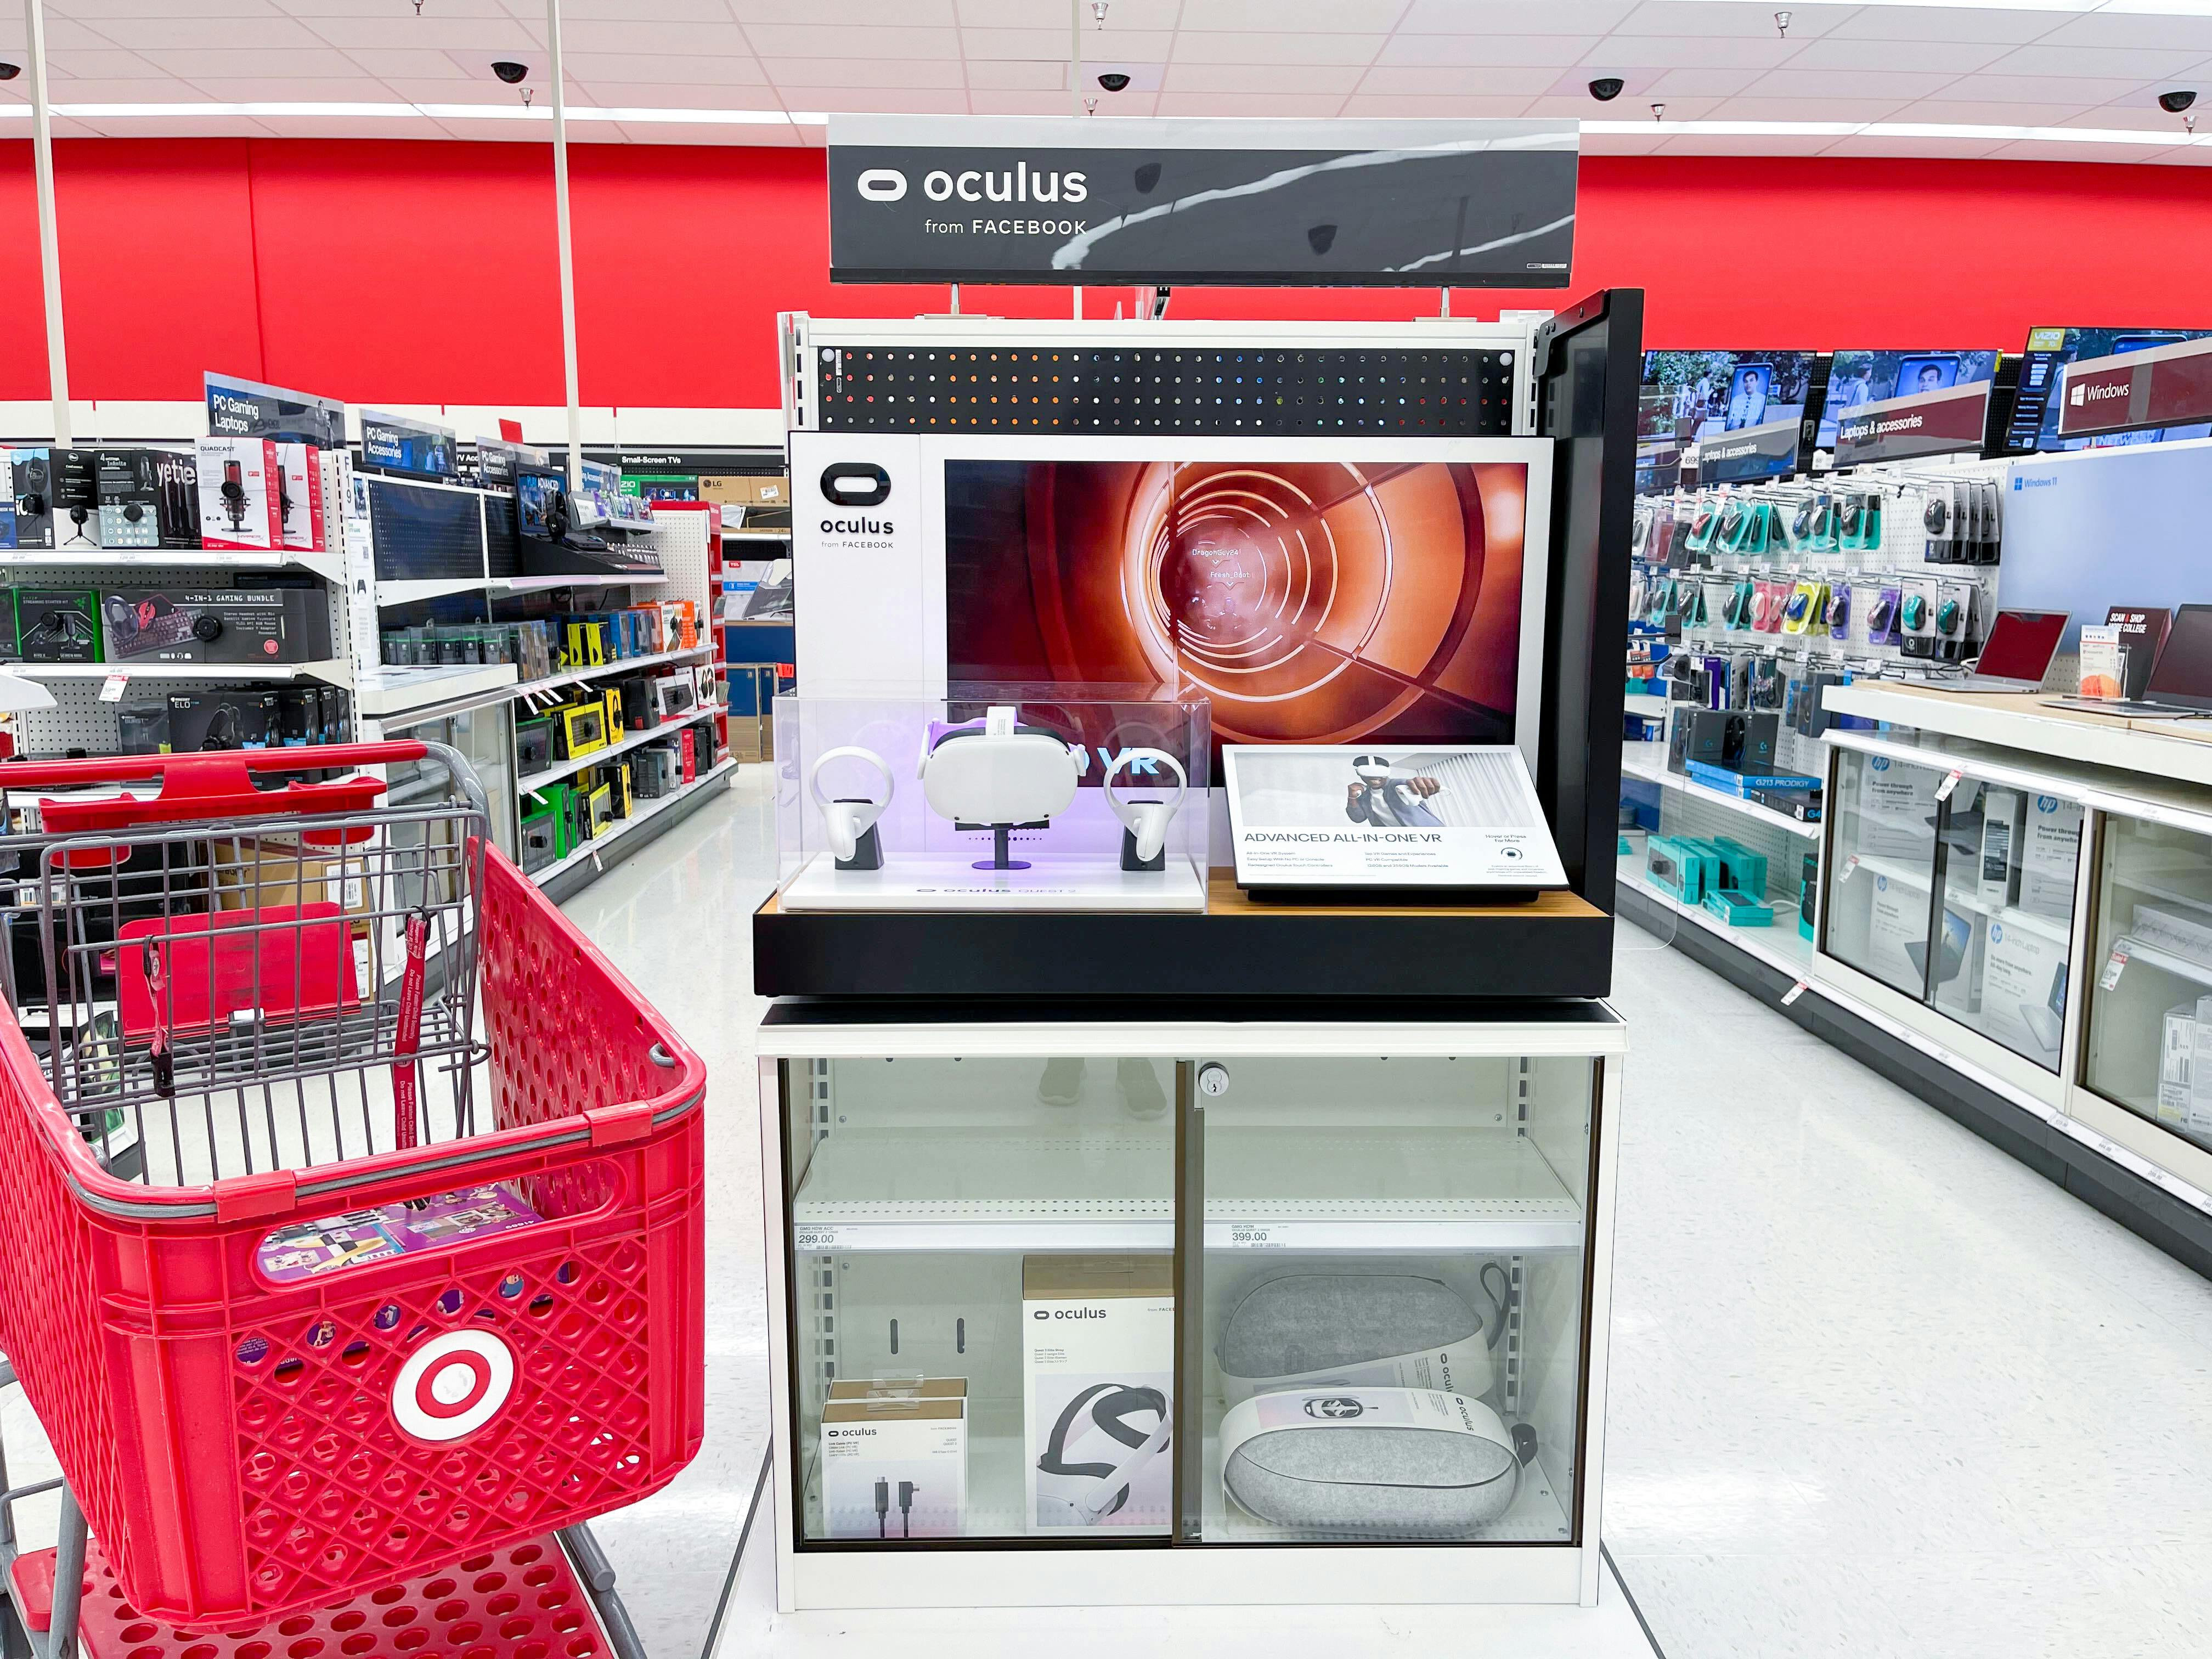 a target cart pulled up in front of an oculus VR headset display at Target